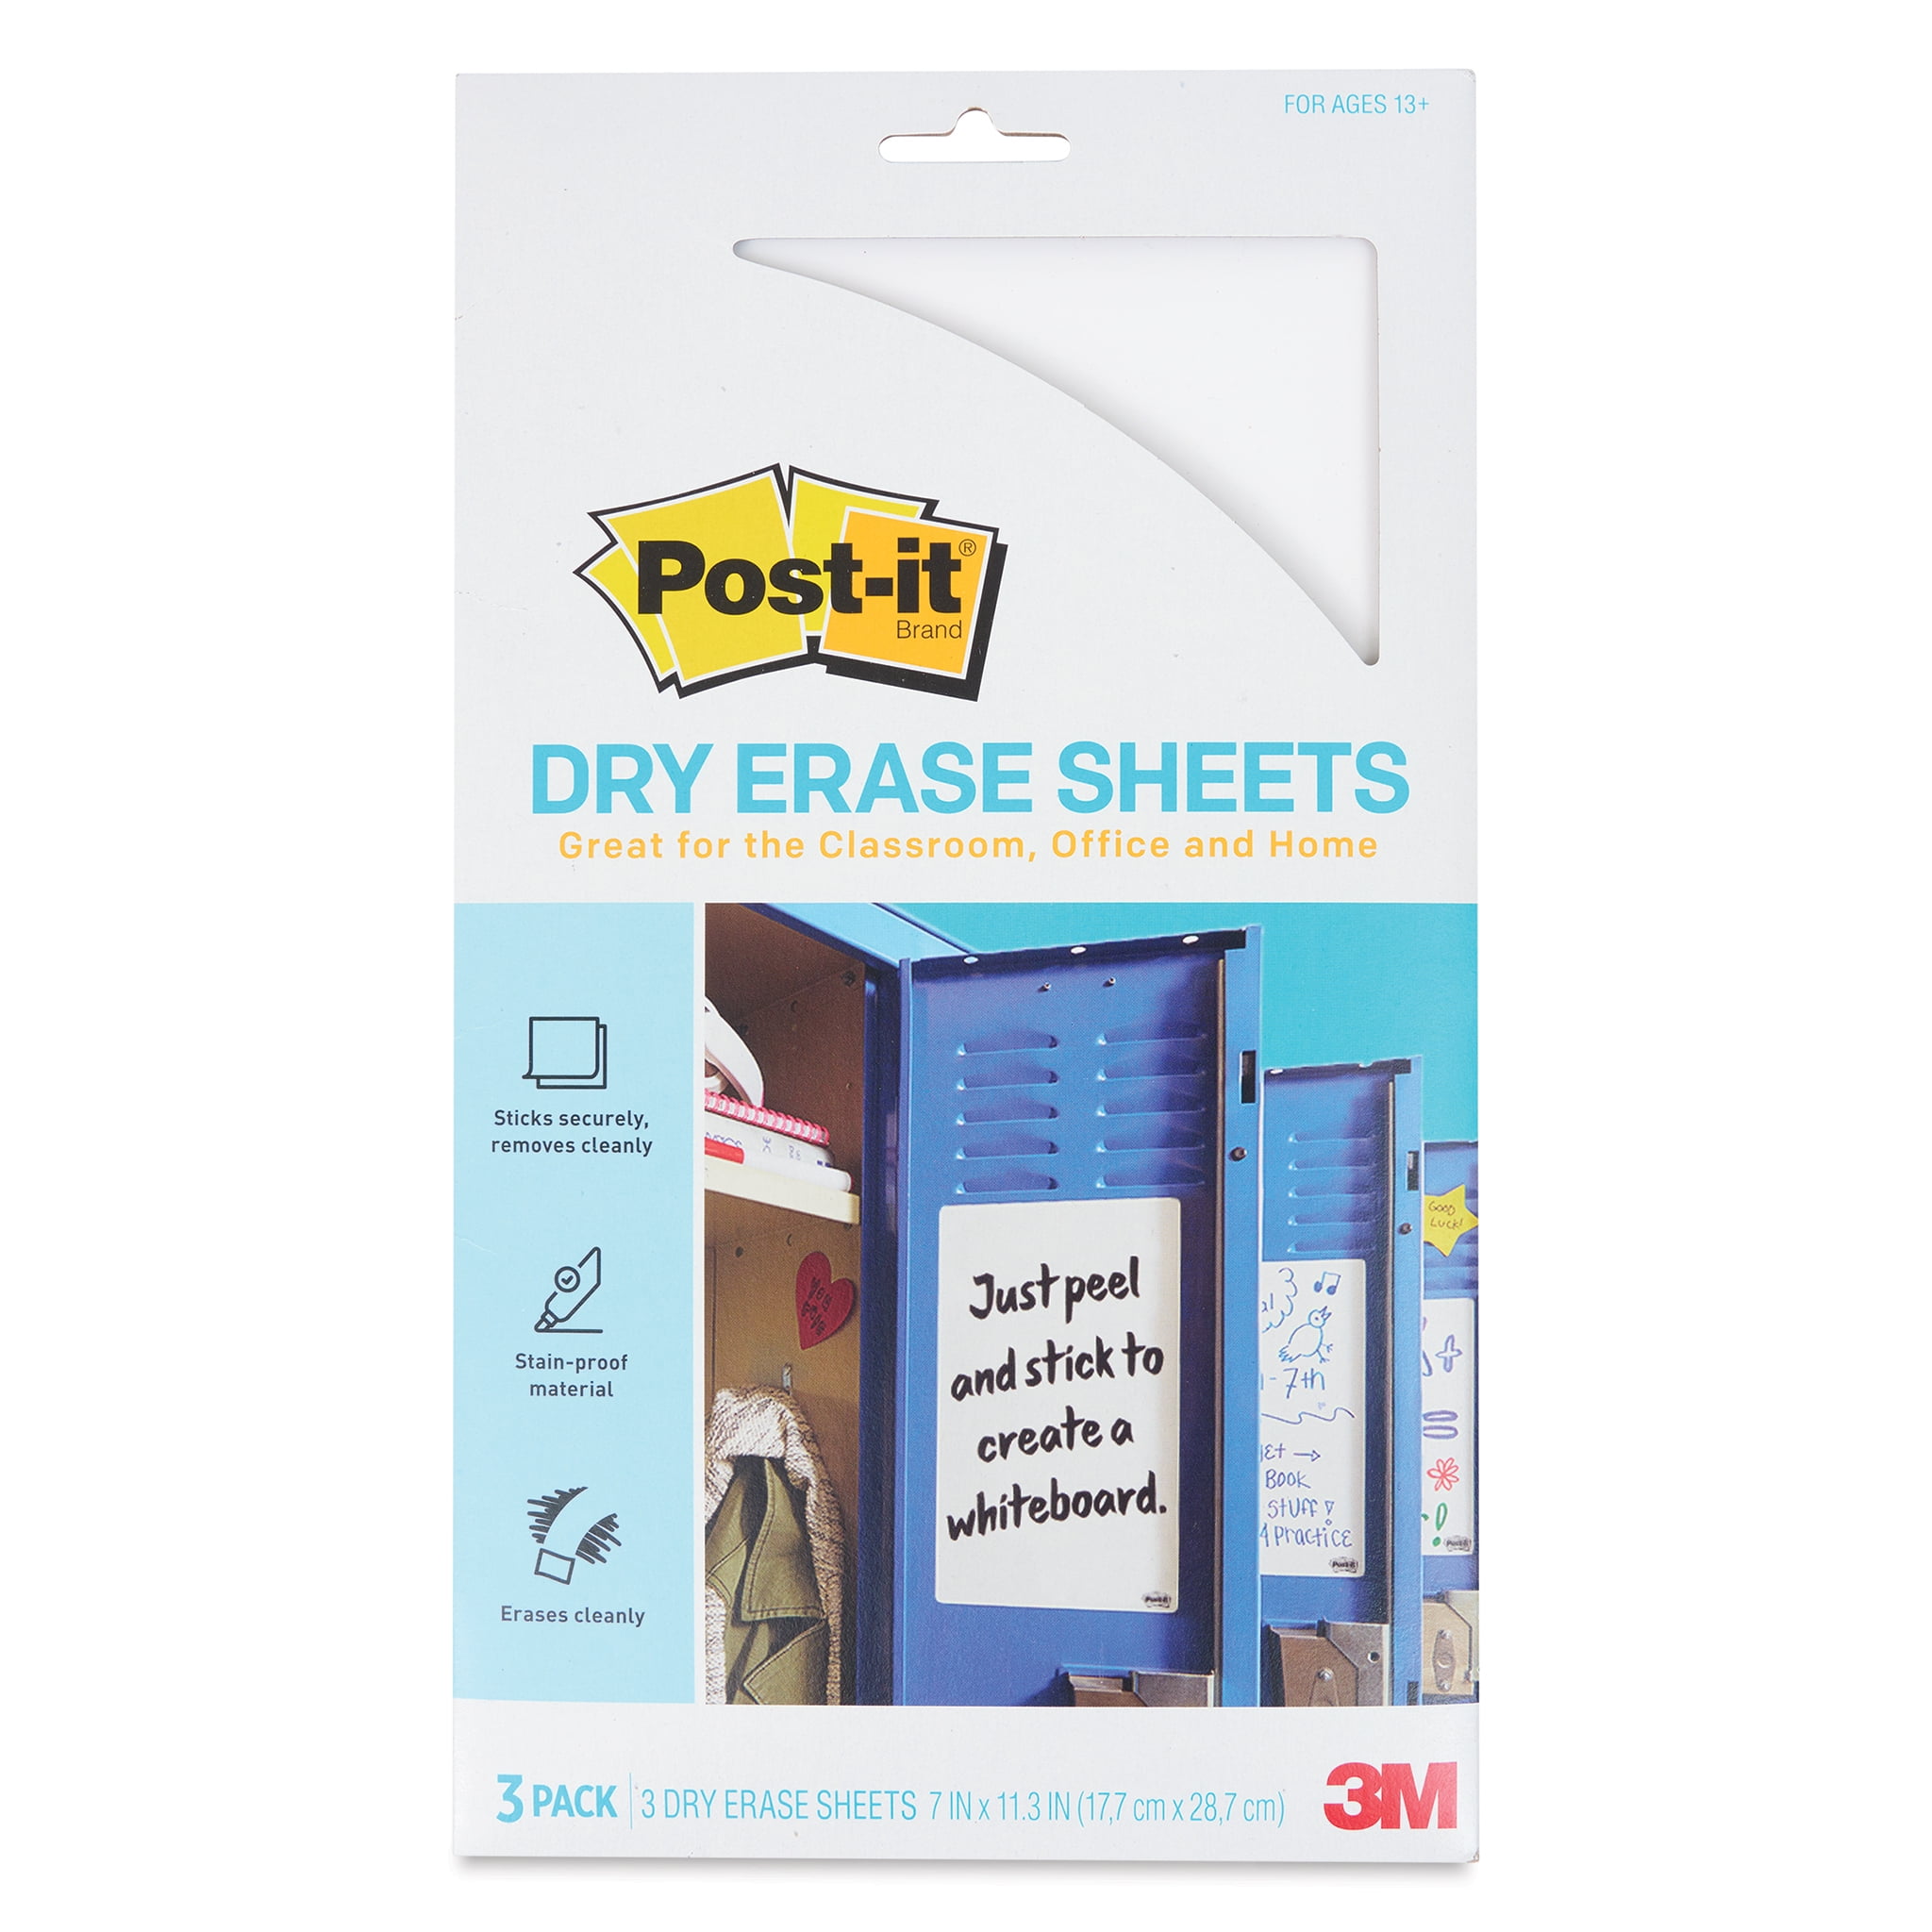  Versatile Dry Erase Sticky Notes Set - 12 Pack of 4x4  Reusable Multicolor Whiteboard Stickers with 2 Markers and Pouch -  Eco-Friendly & Washable - Ideal for Labels, Lists, Planning